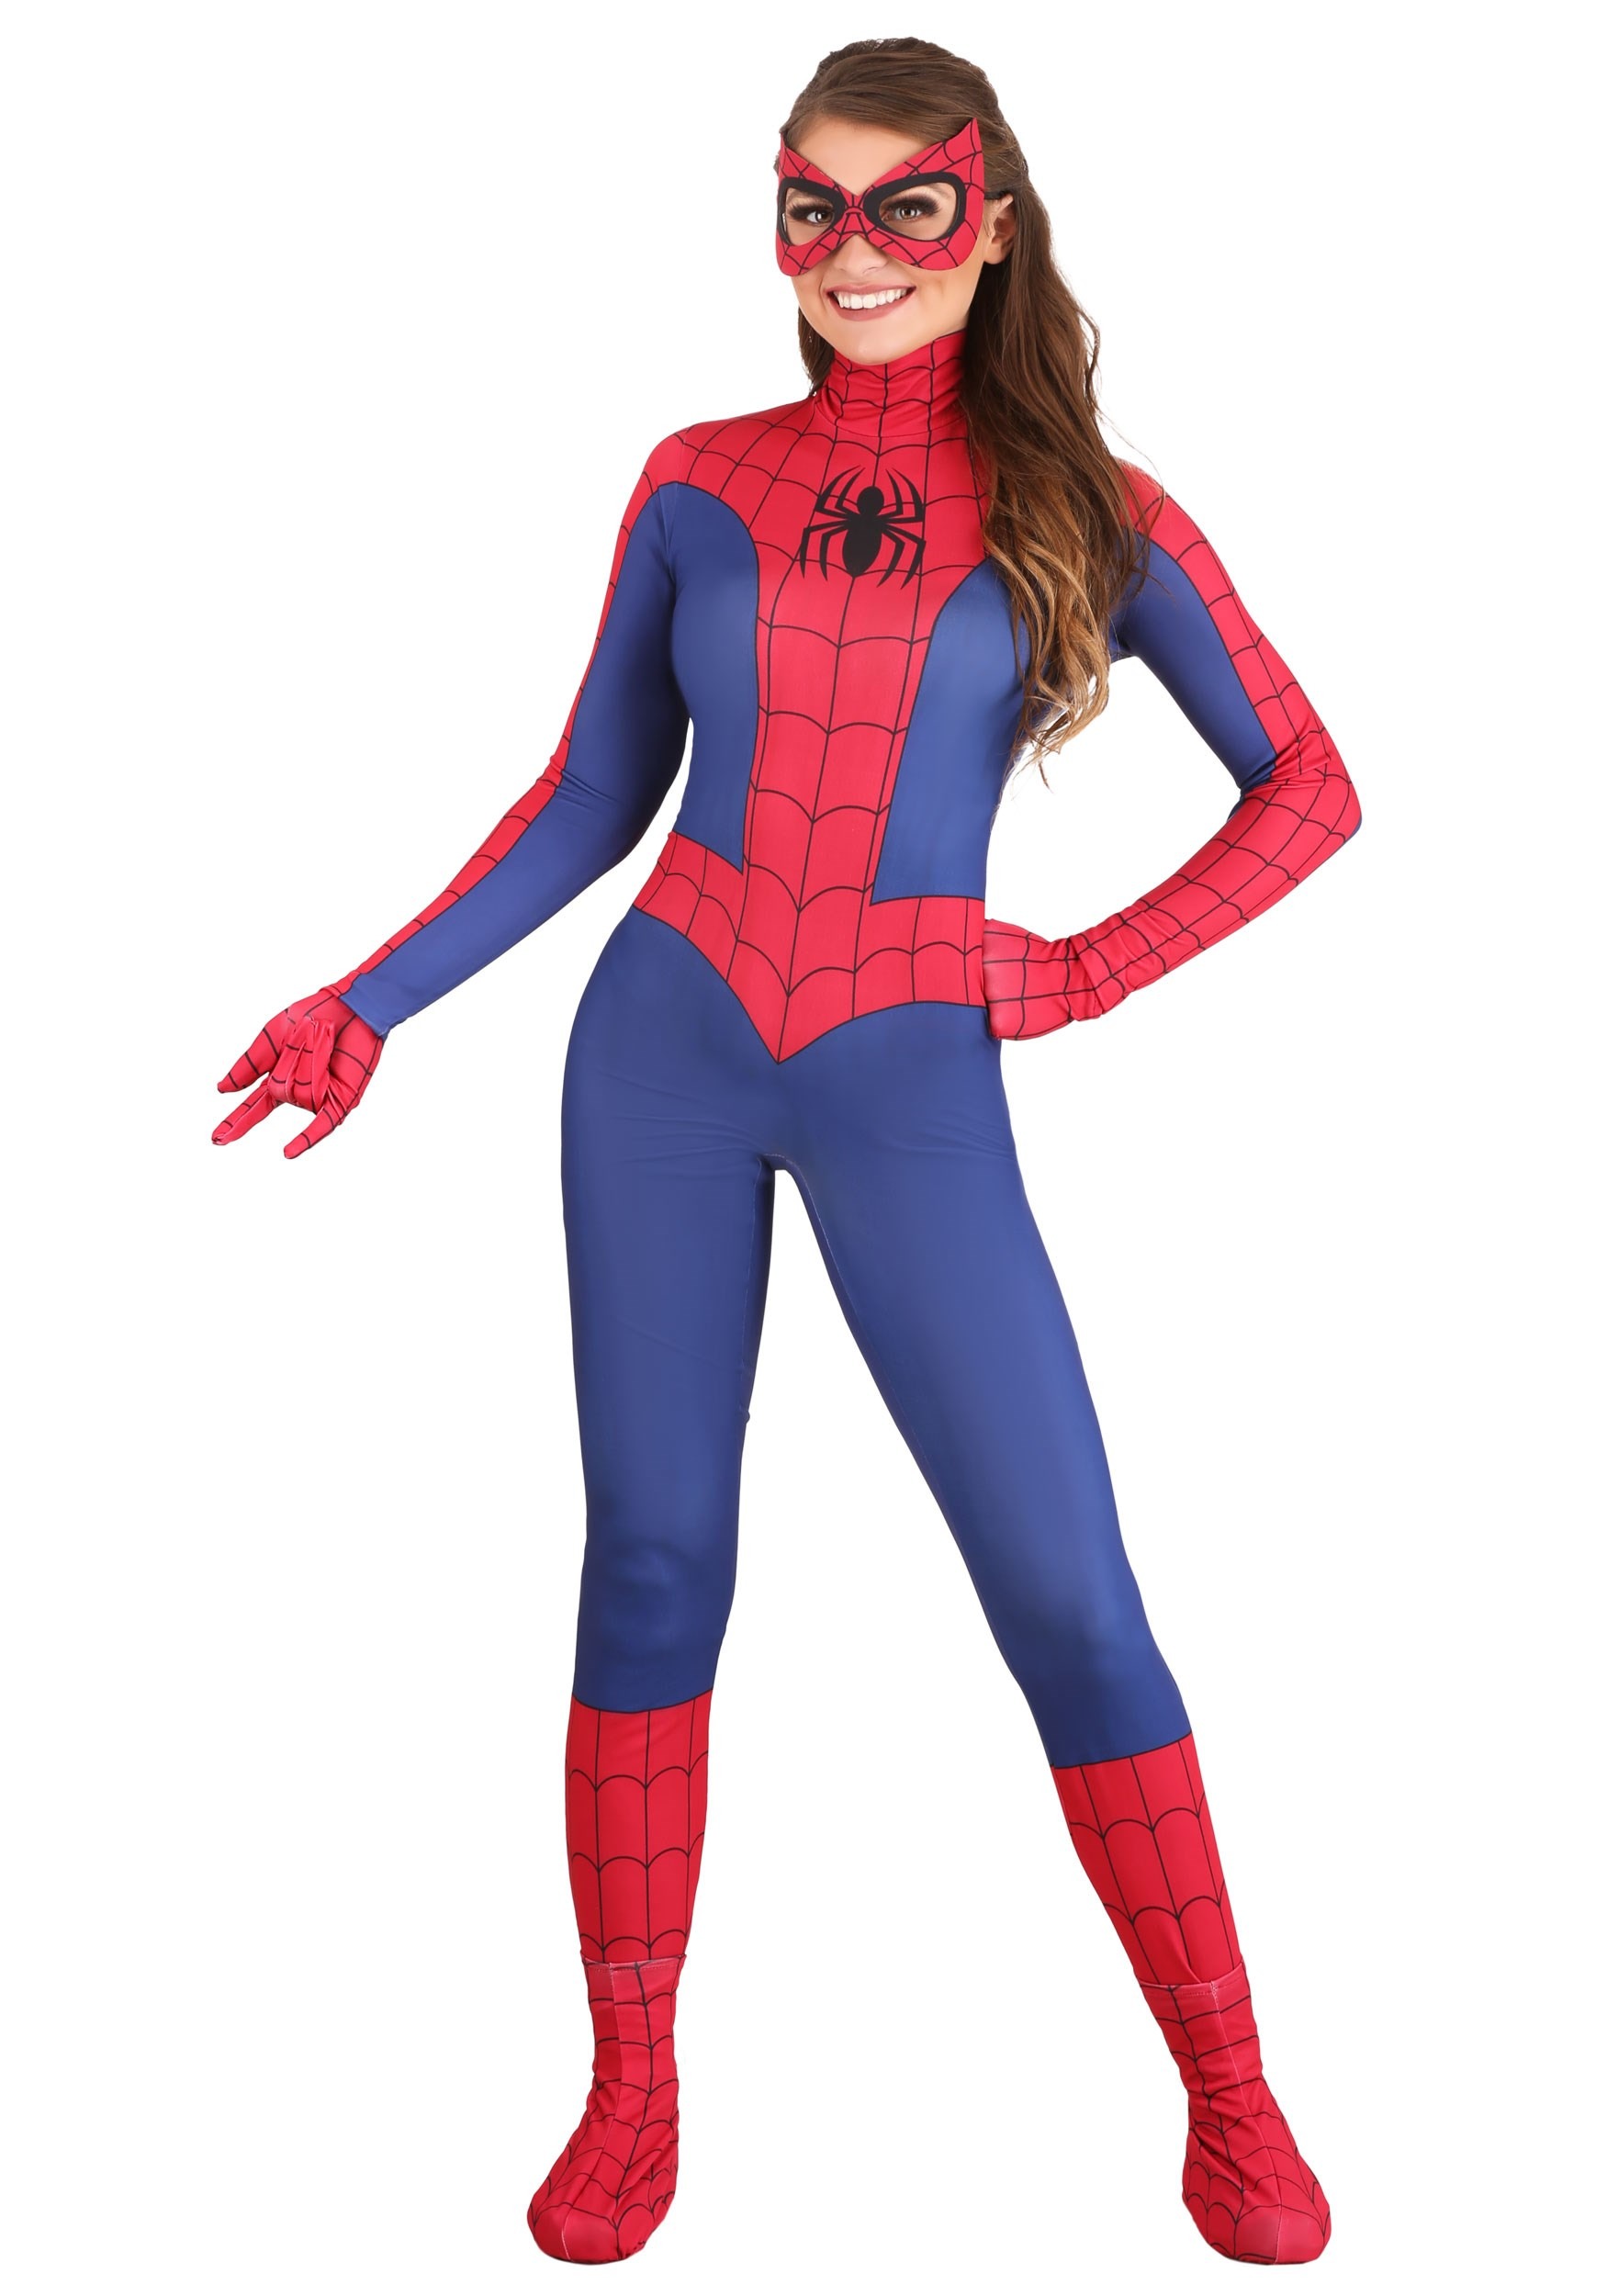 Image of Spider-Man Costume for Women | Spider Girl Costume ID RU701750-L